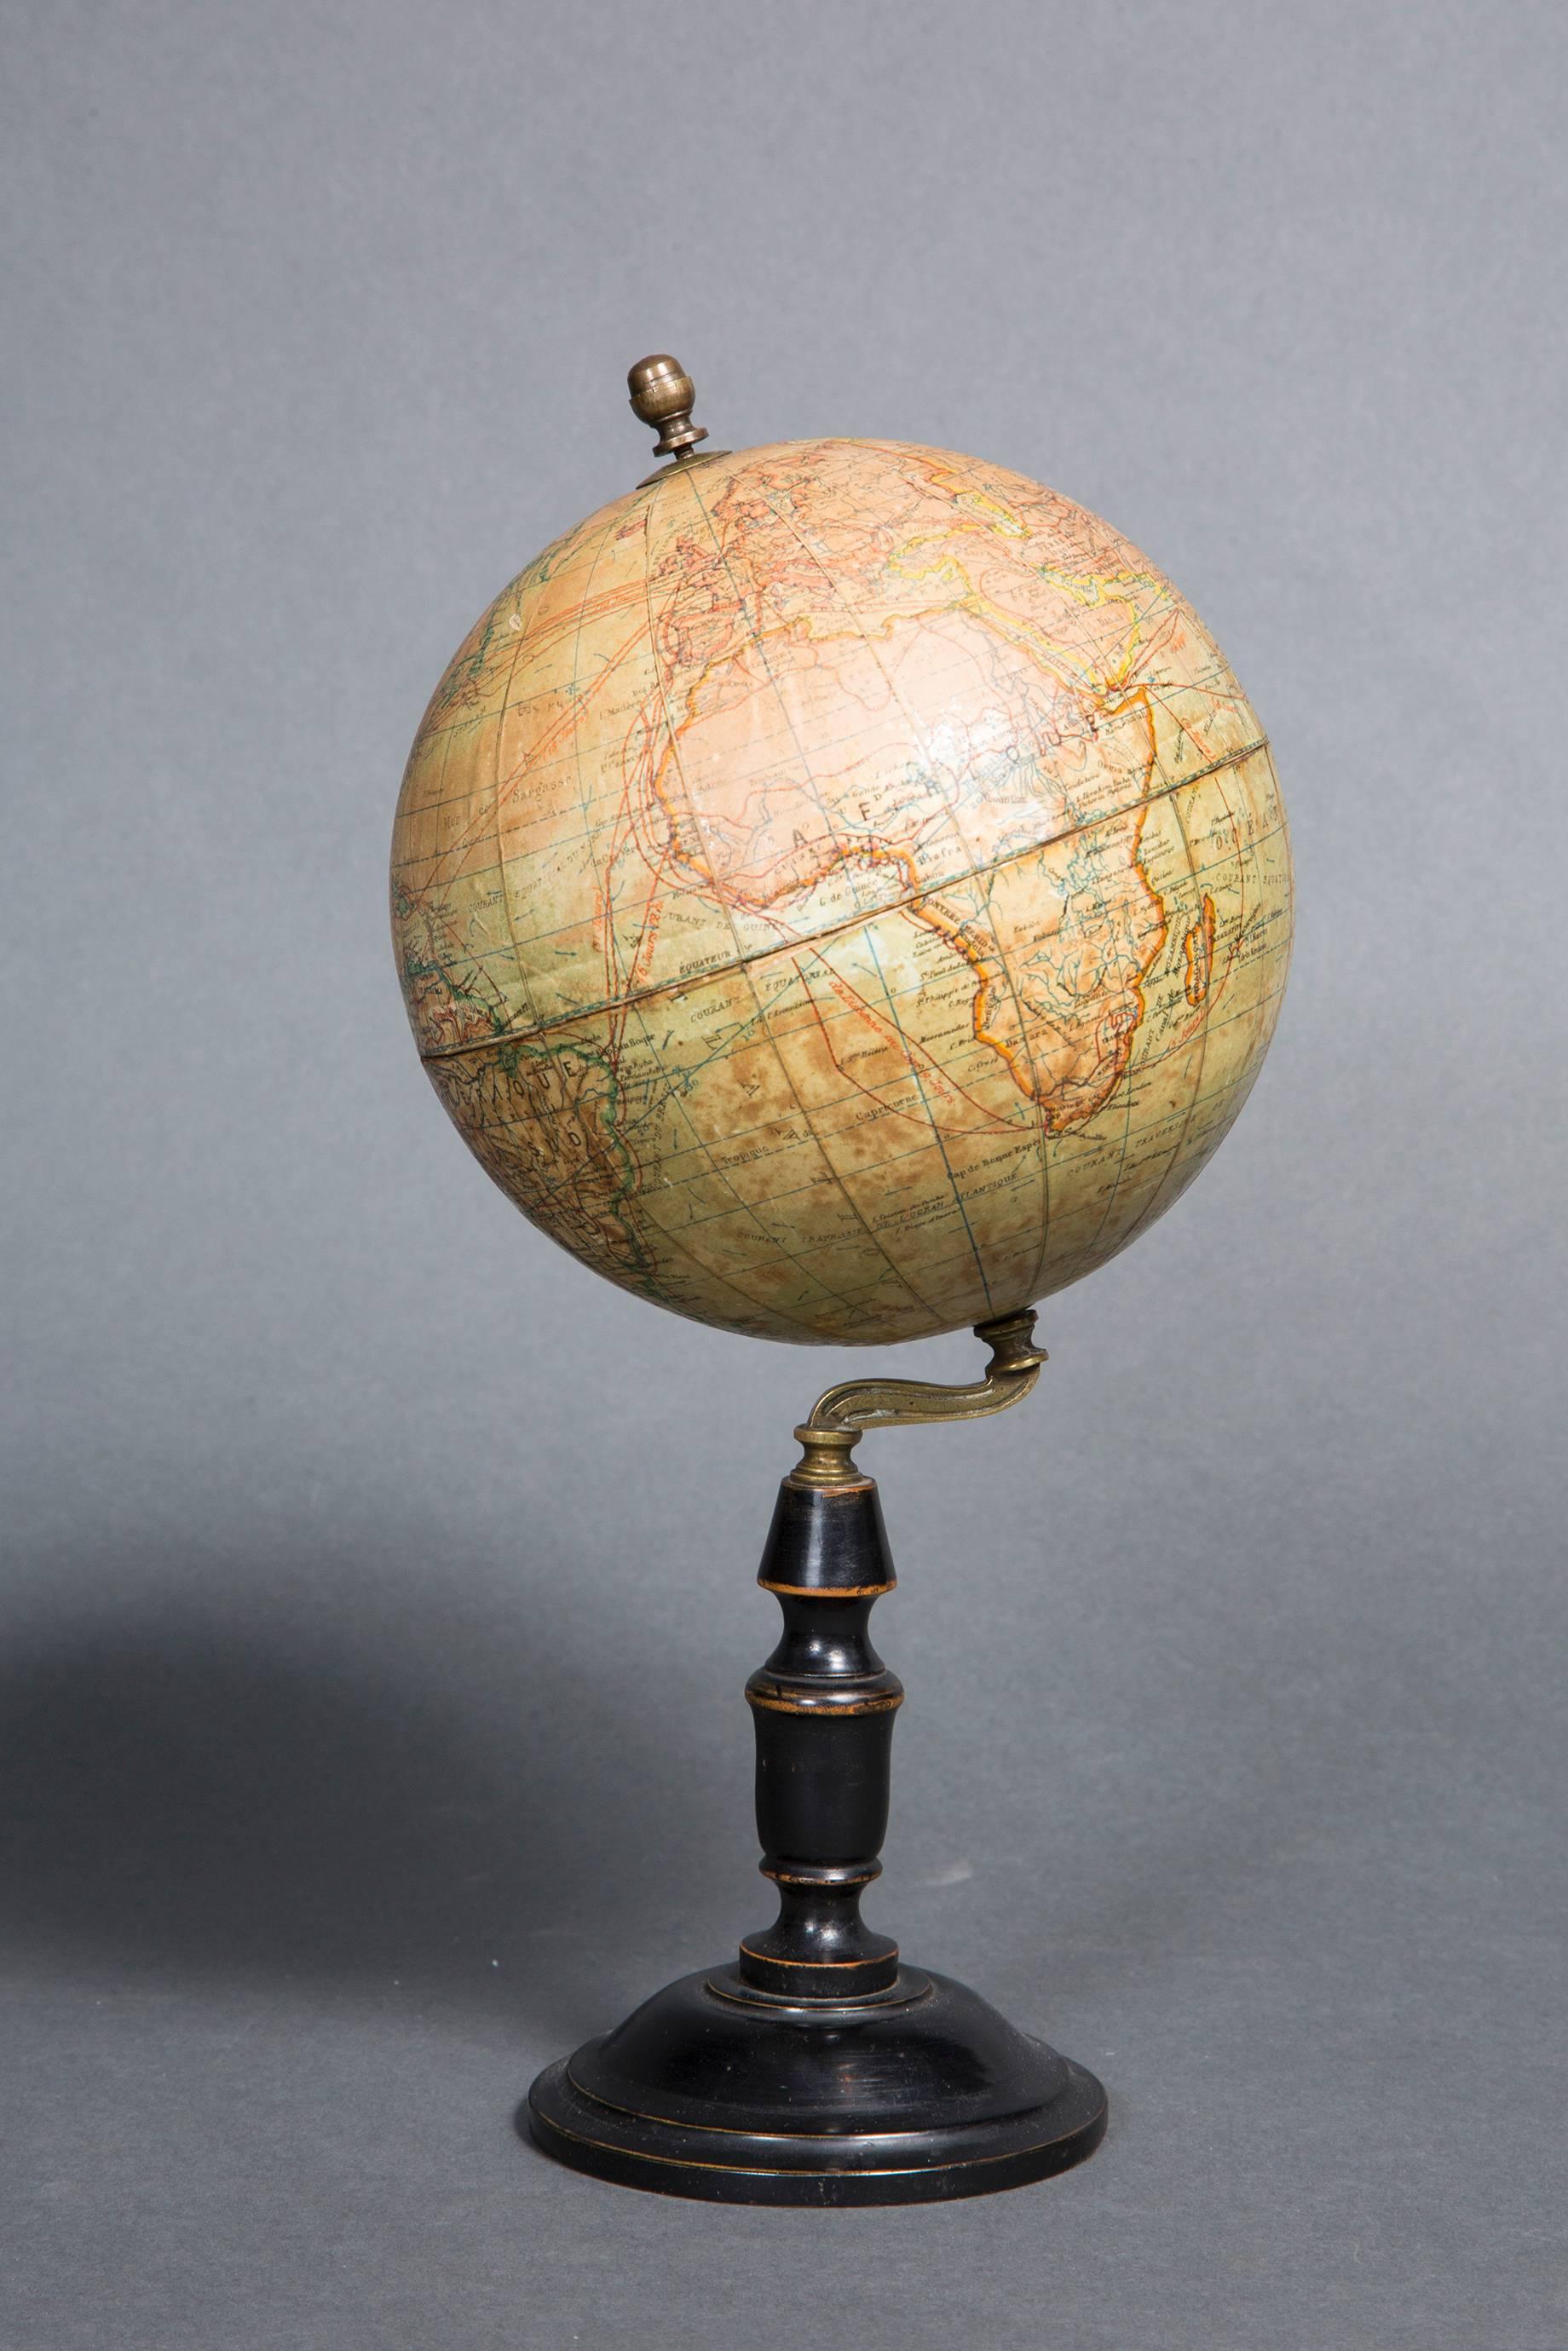 Image 2/3: Earth Sphere by Lebegue & Cie, 30 Rue de Lille Paris, late 19th century Napoleon III mounted on a ebonized blackened wood stand.
Lebègue J. & Cie was a famous Brussels publishing house in the 19th century who then opened a sales office